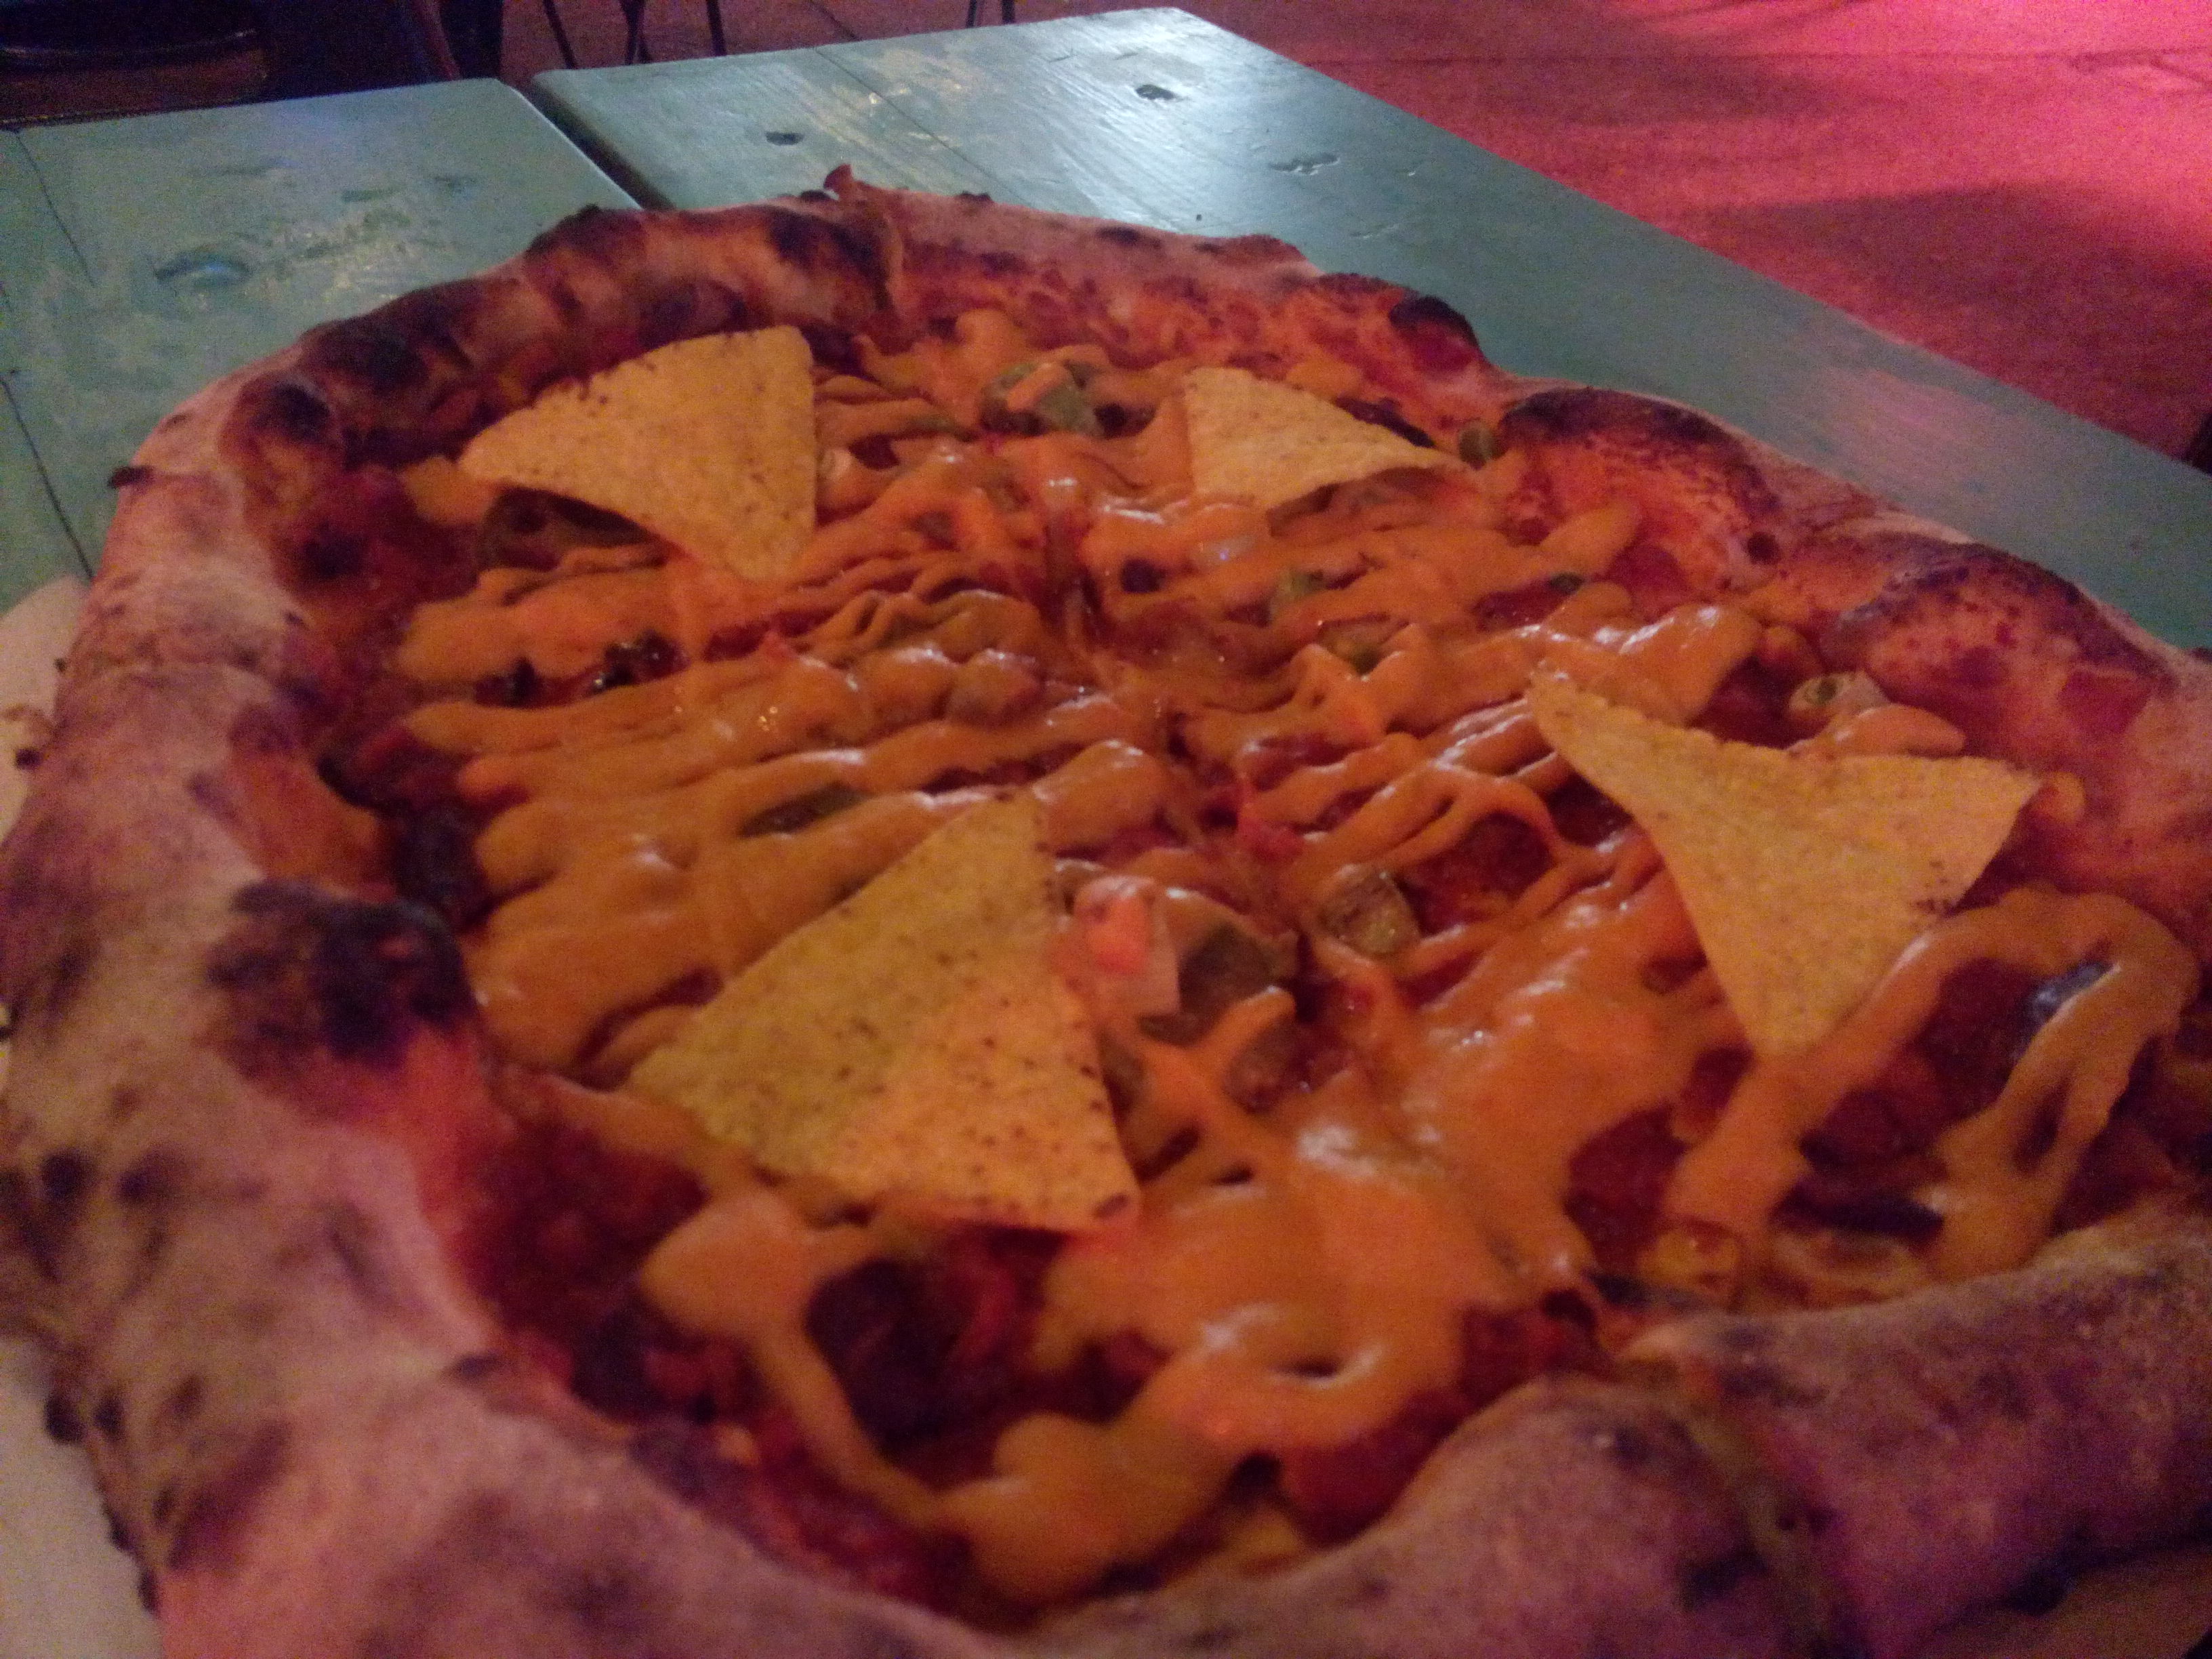 Dimly lit pizza with nachos and cheesey sauce on top